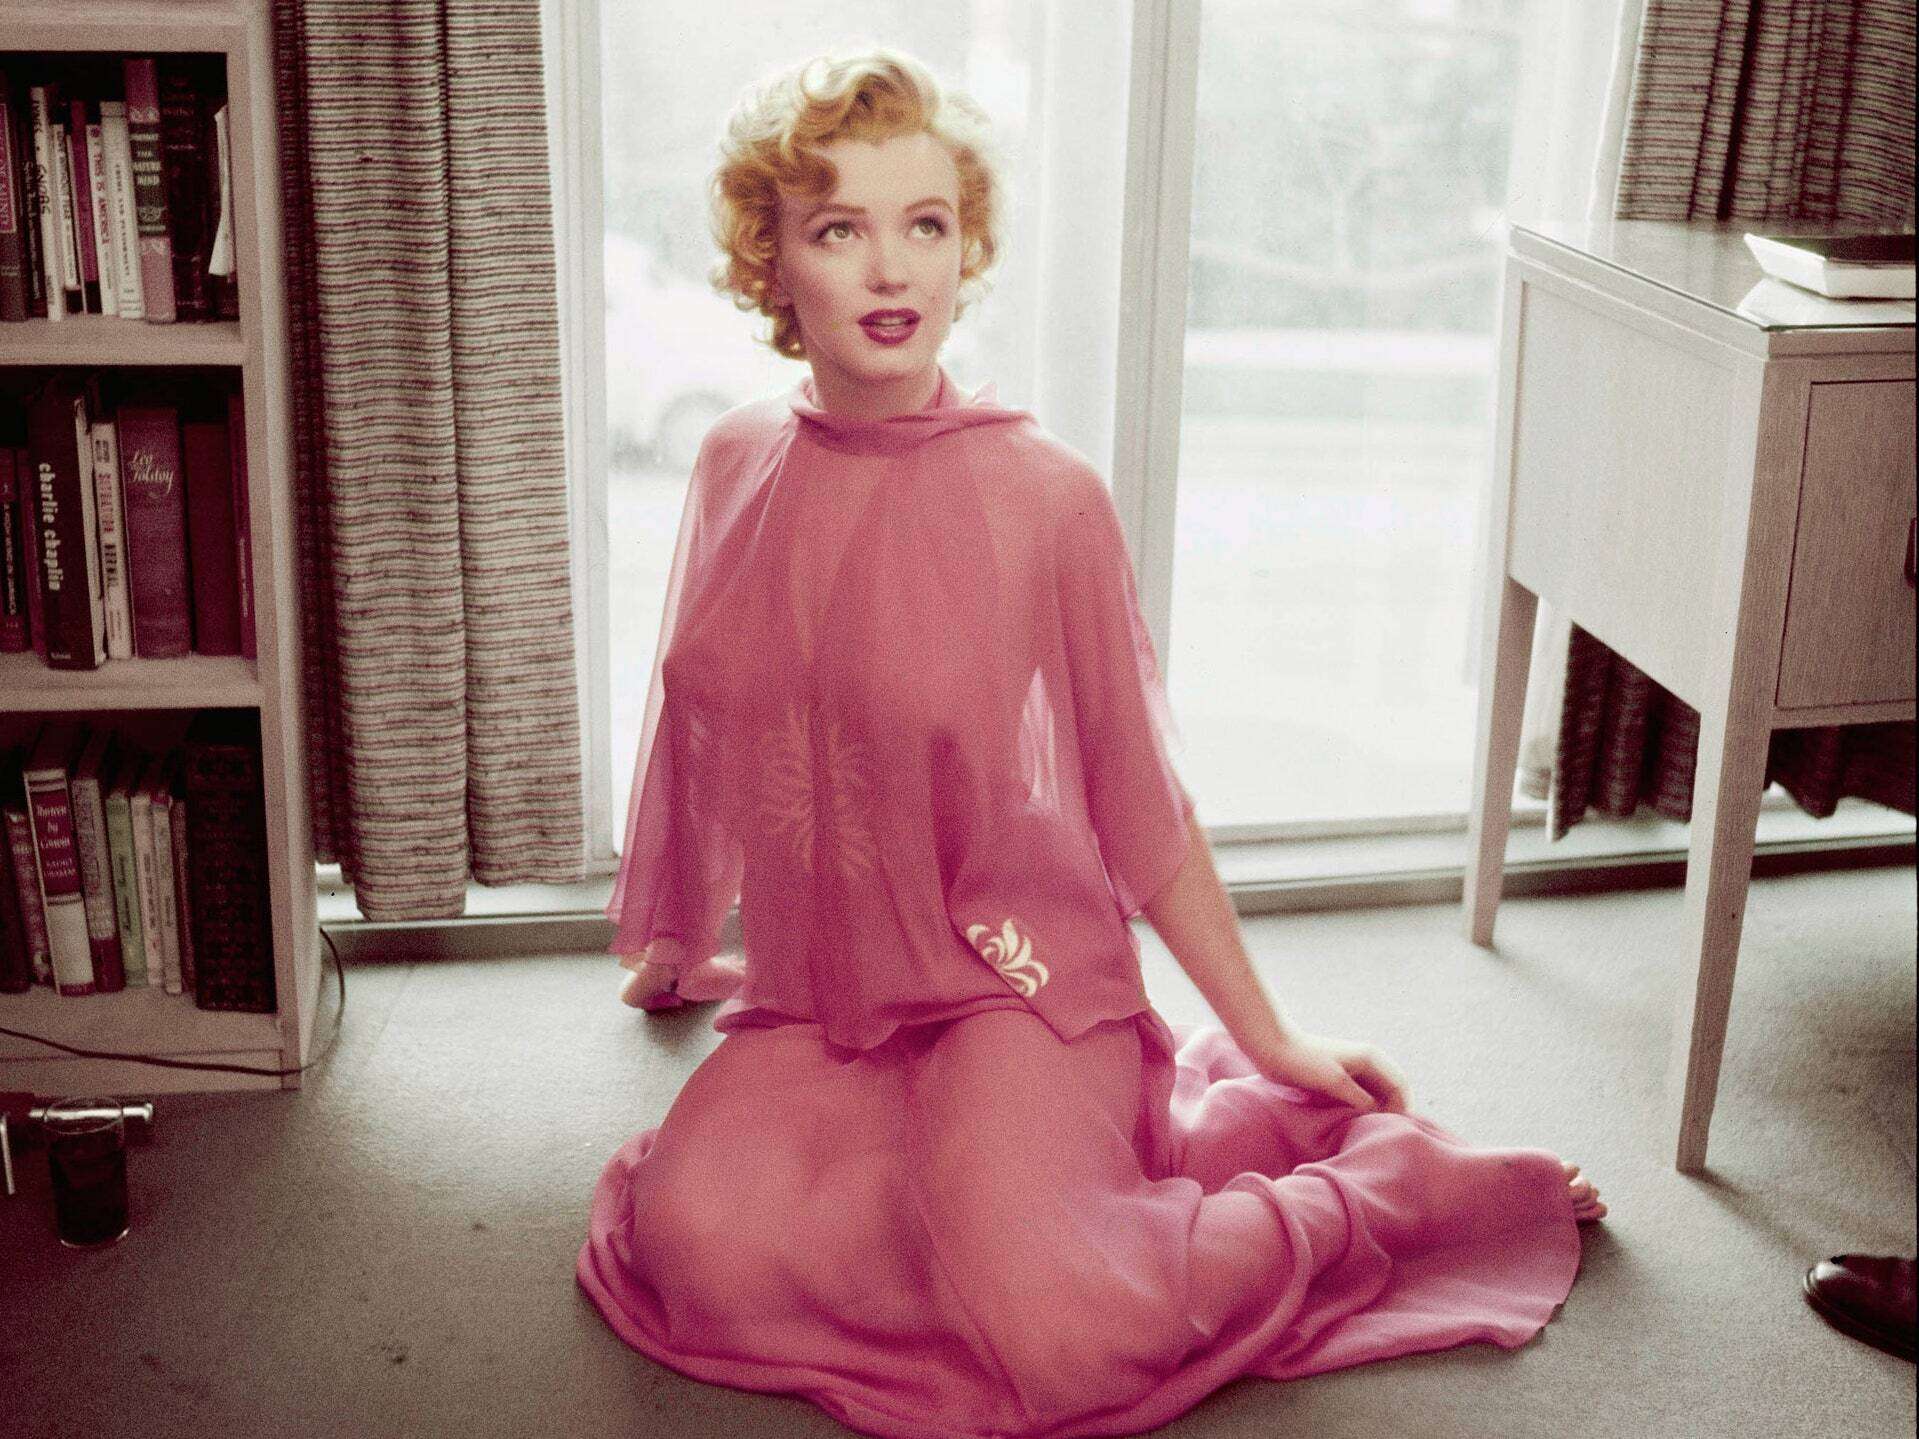 Who is Marilyn Monroe? Biography, husband, children, movies, parents, children, height, cause of death